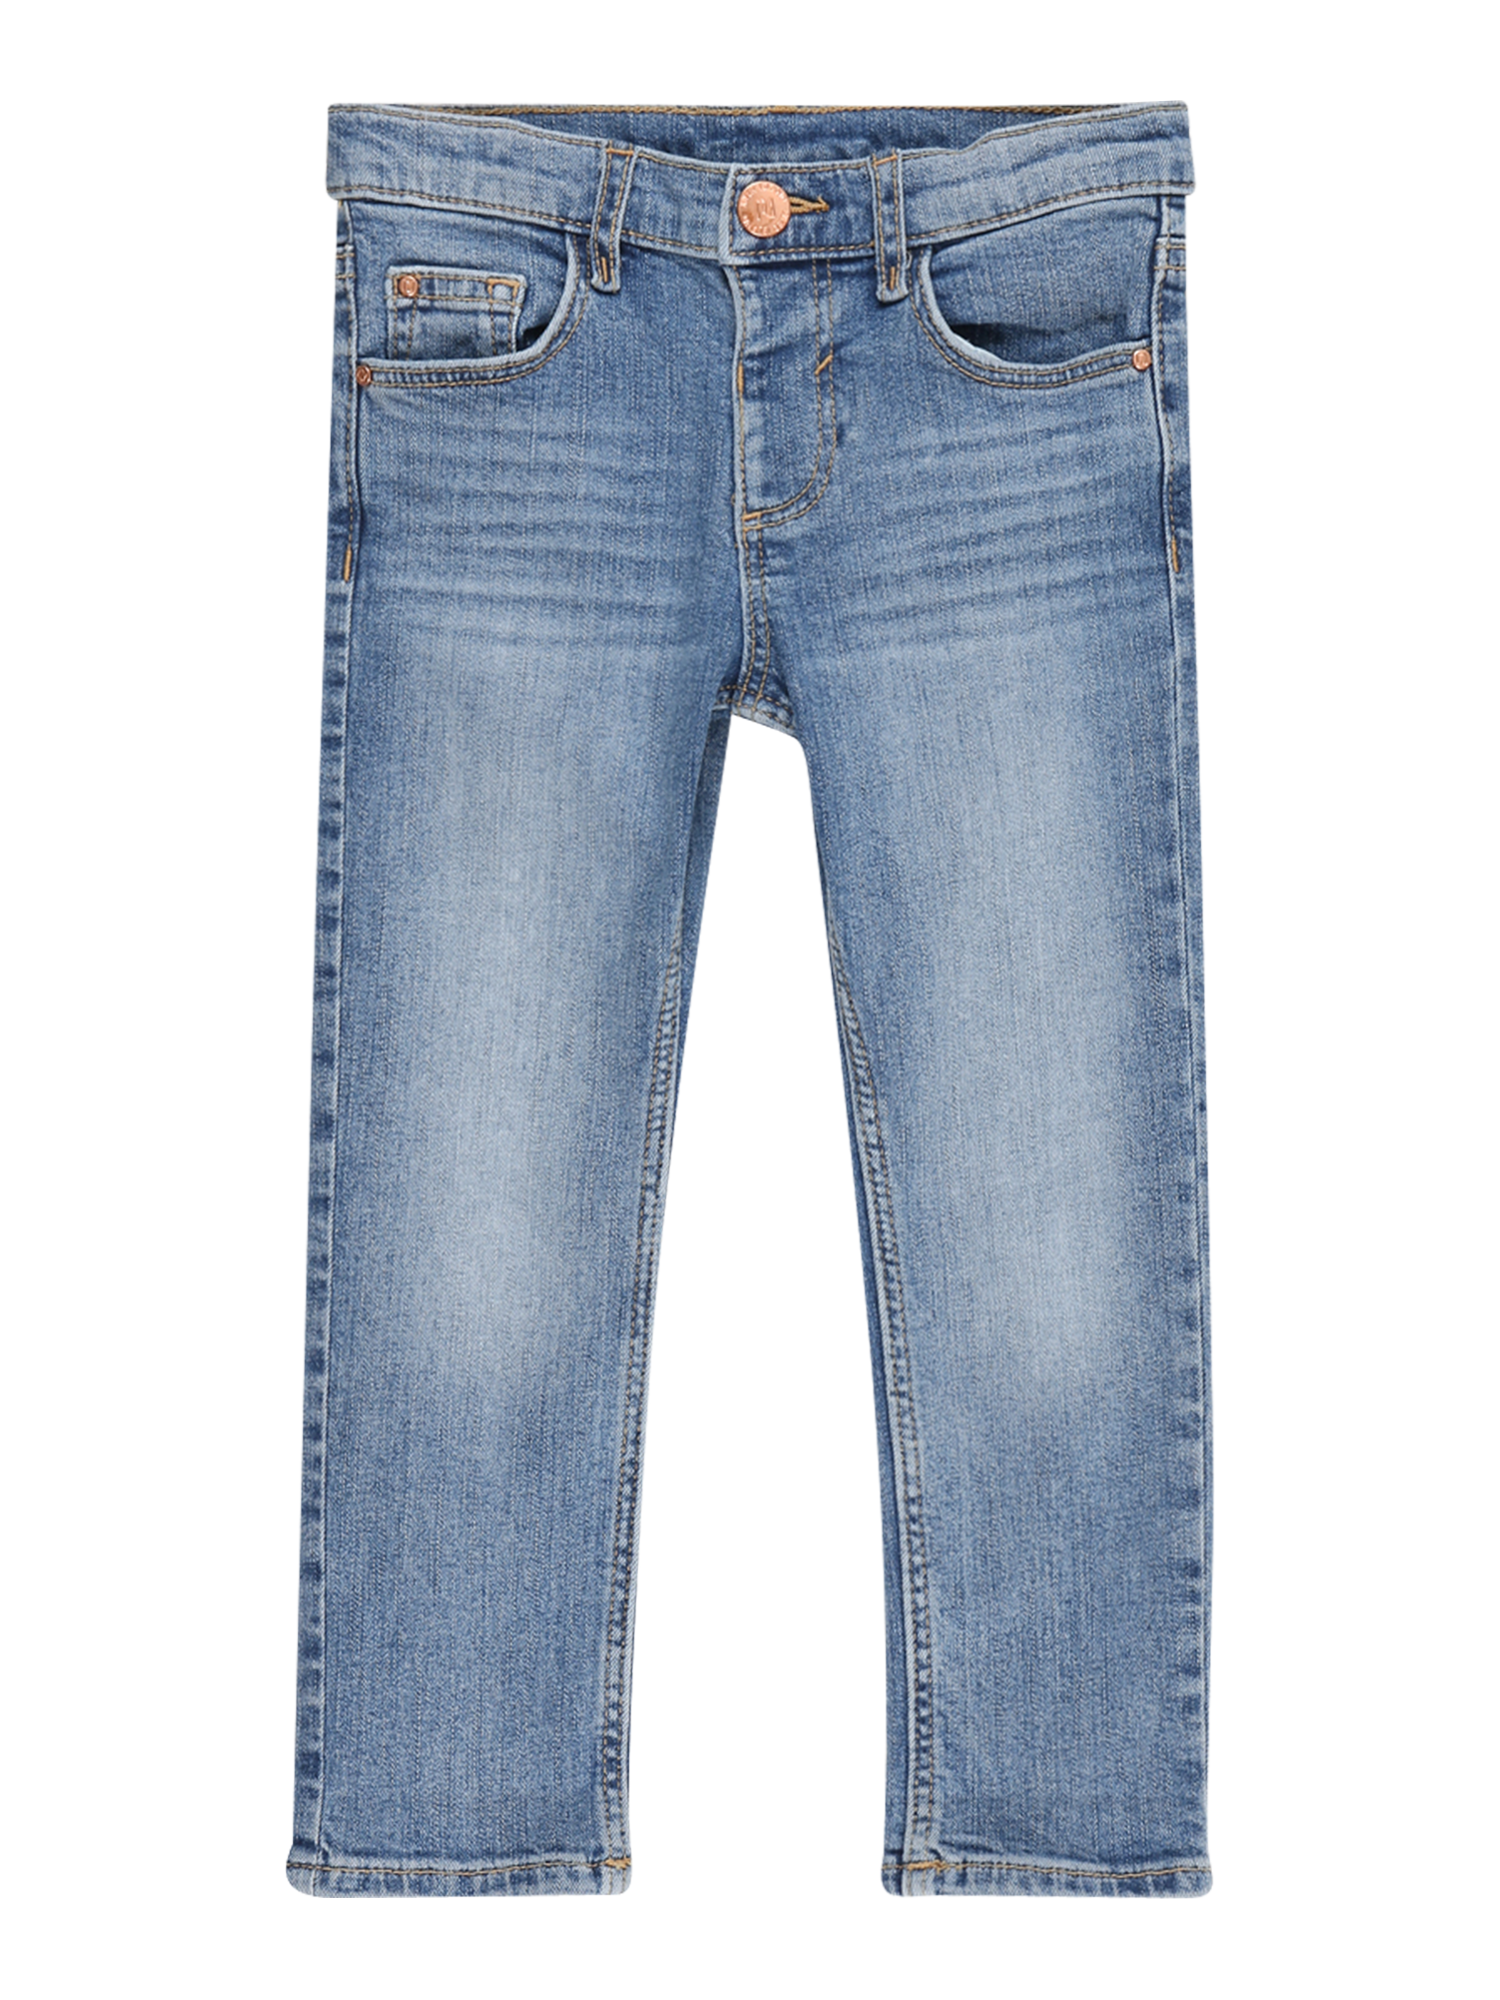 Bambina (taglie 92-140) euaFB River Island Jeans DOVER AMELIE in Blu 